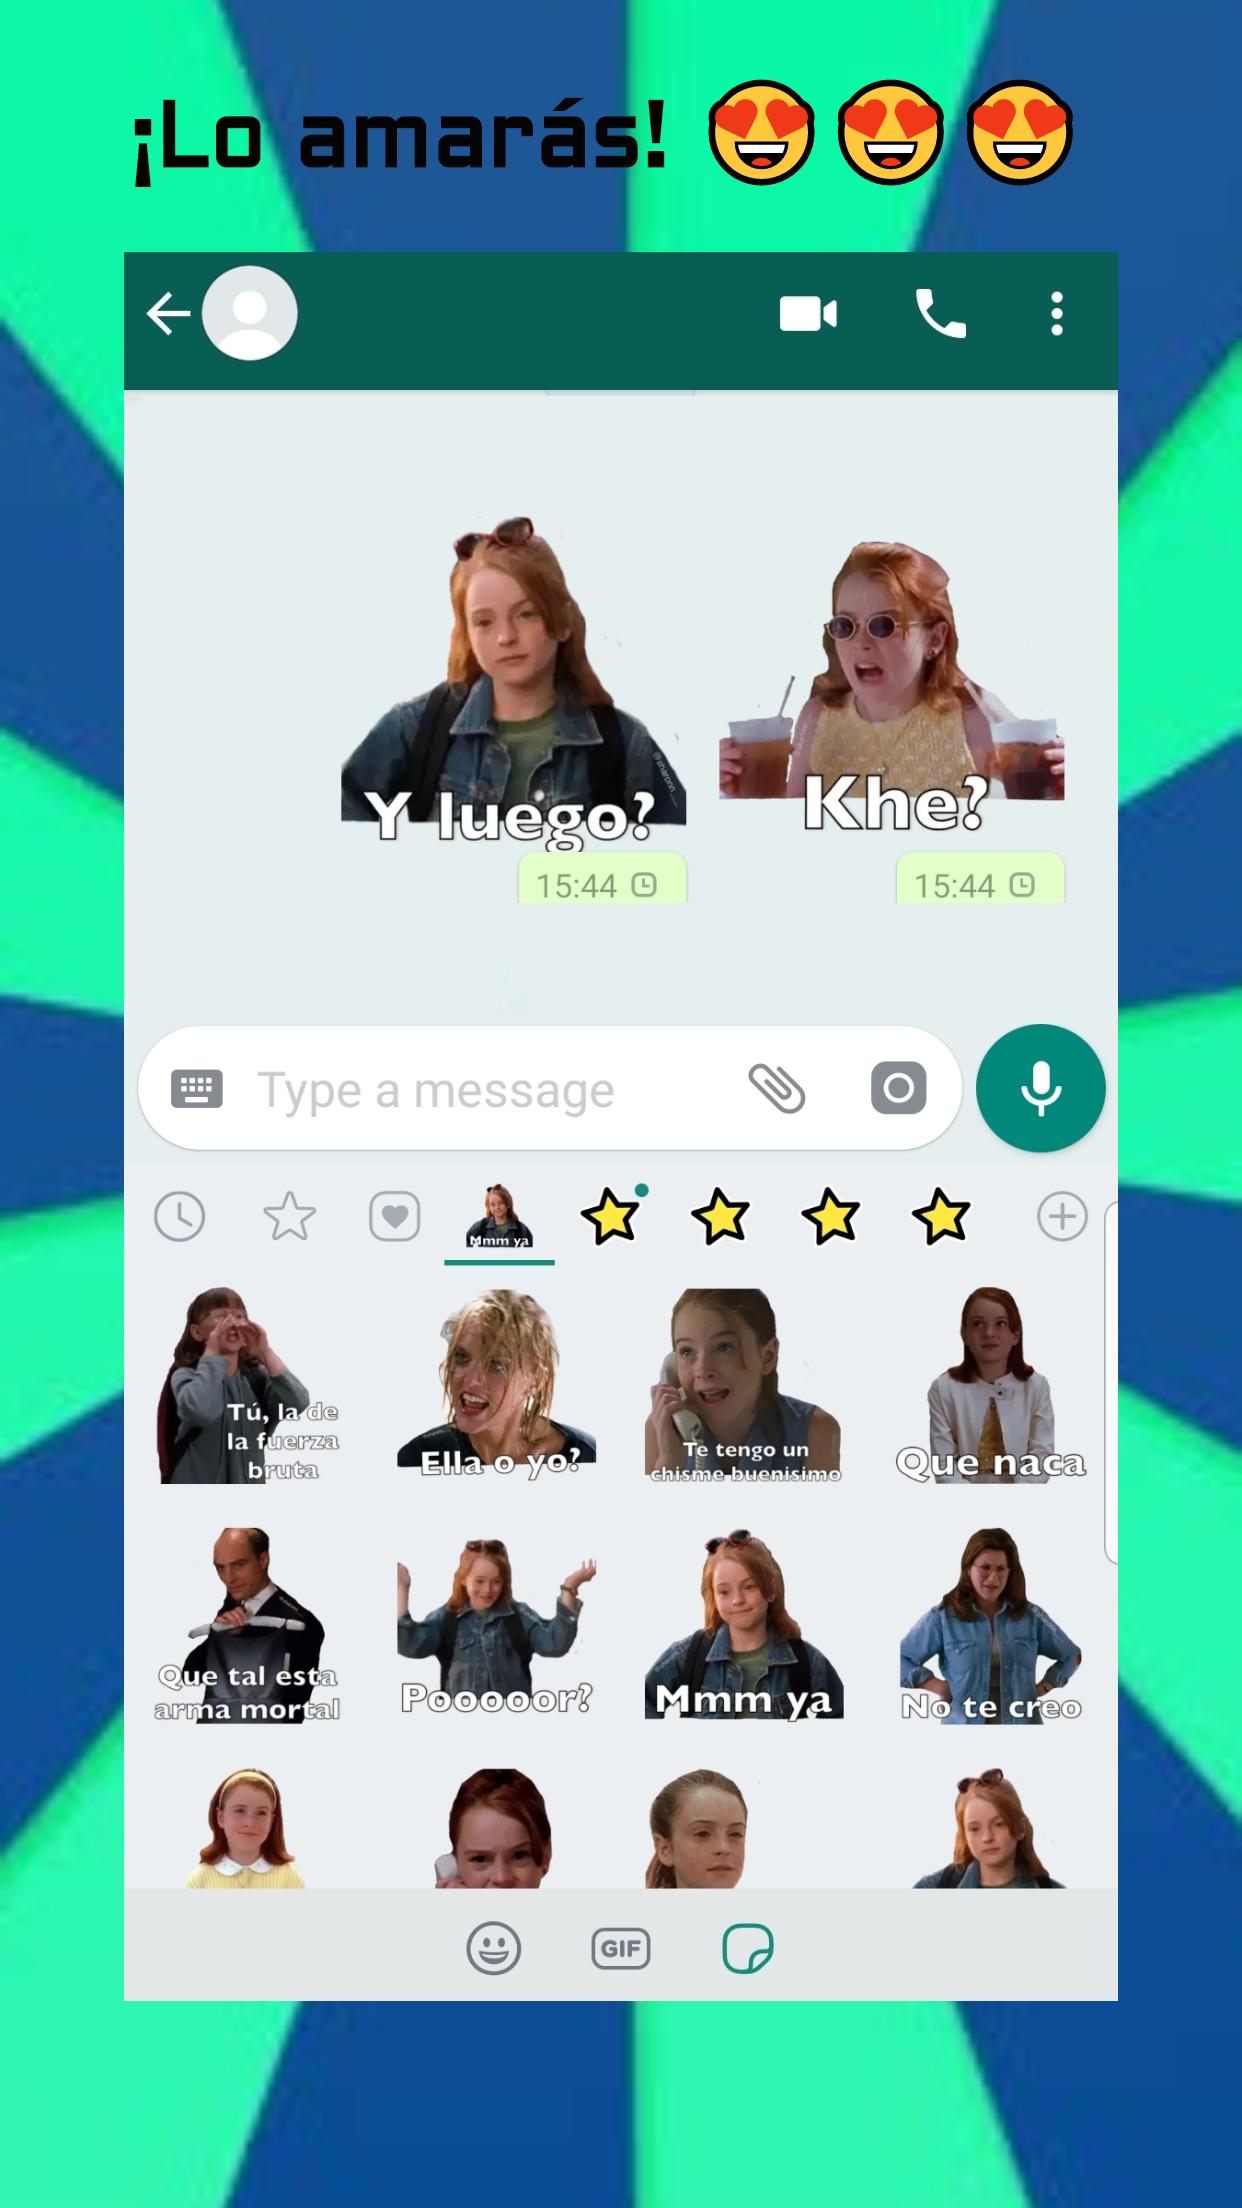 Al Chile Stickers Para Whatsapp For Android Apk Download